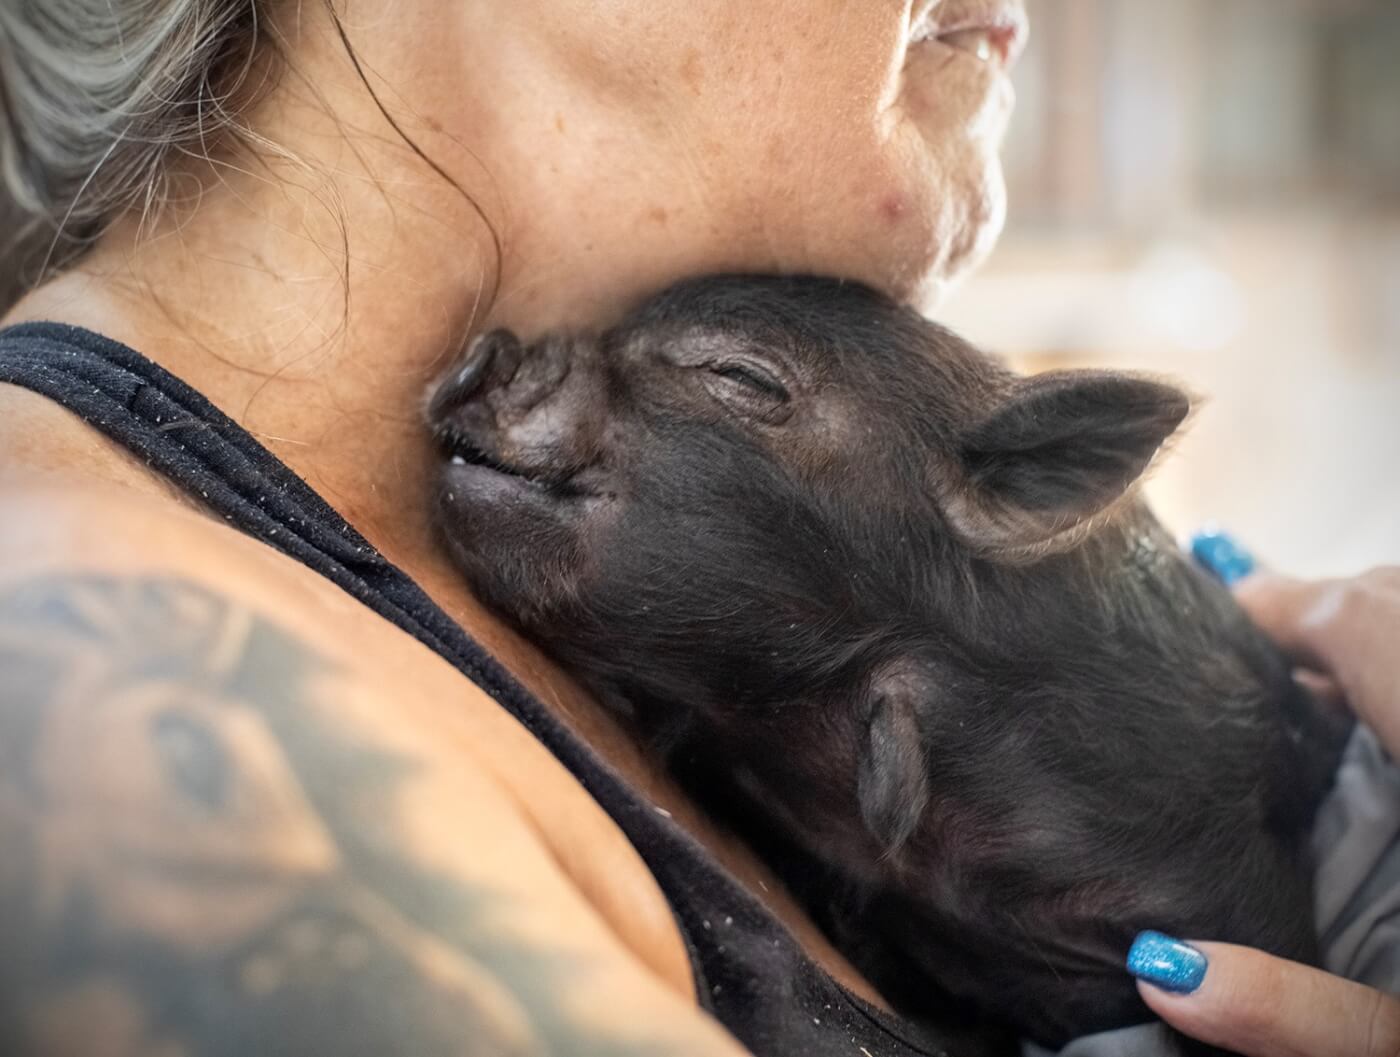 A small pig, eyes closed, snuggling up to a human chin and breast